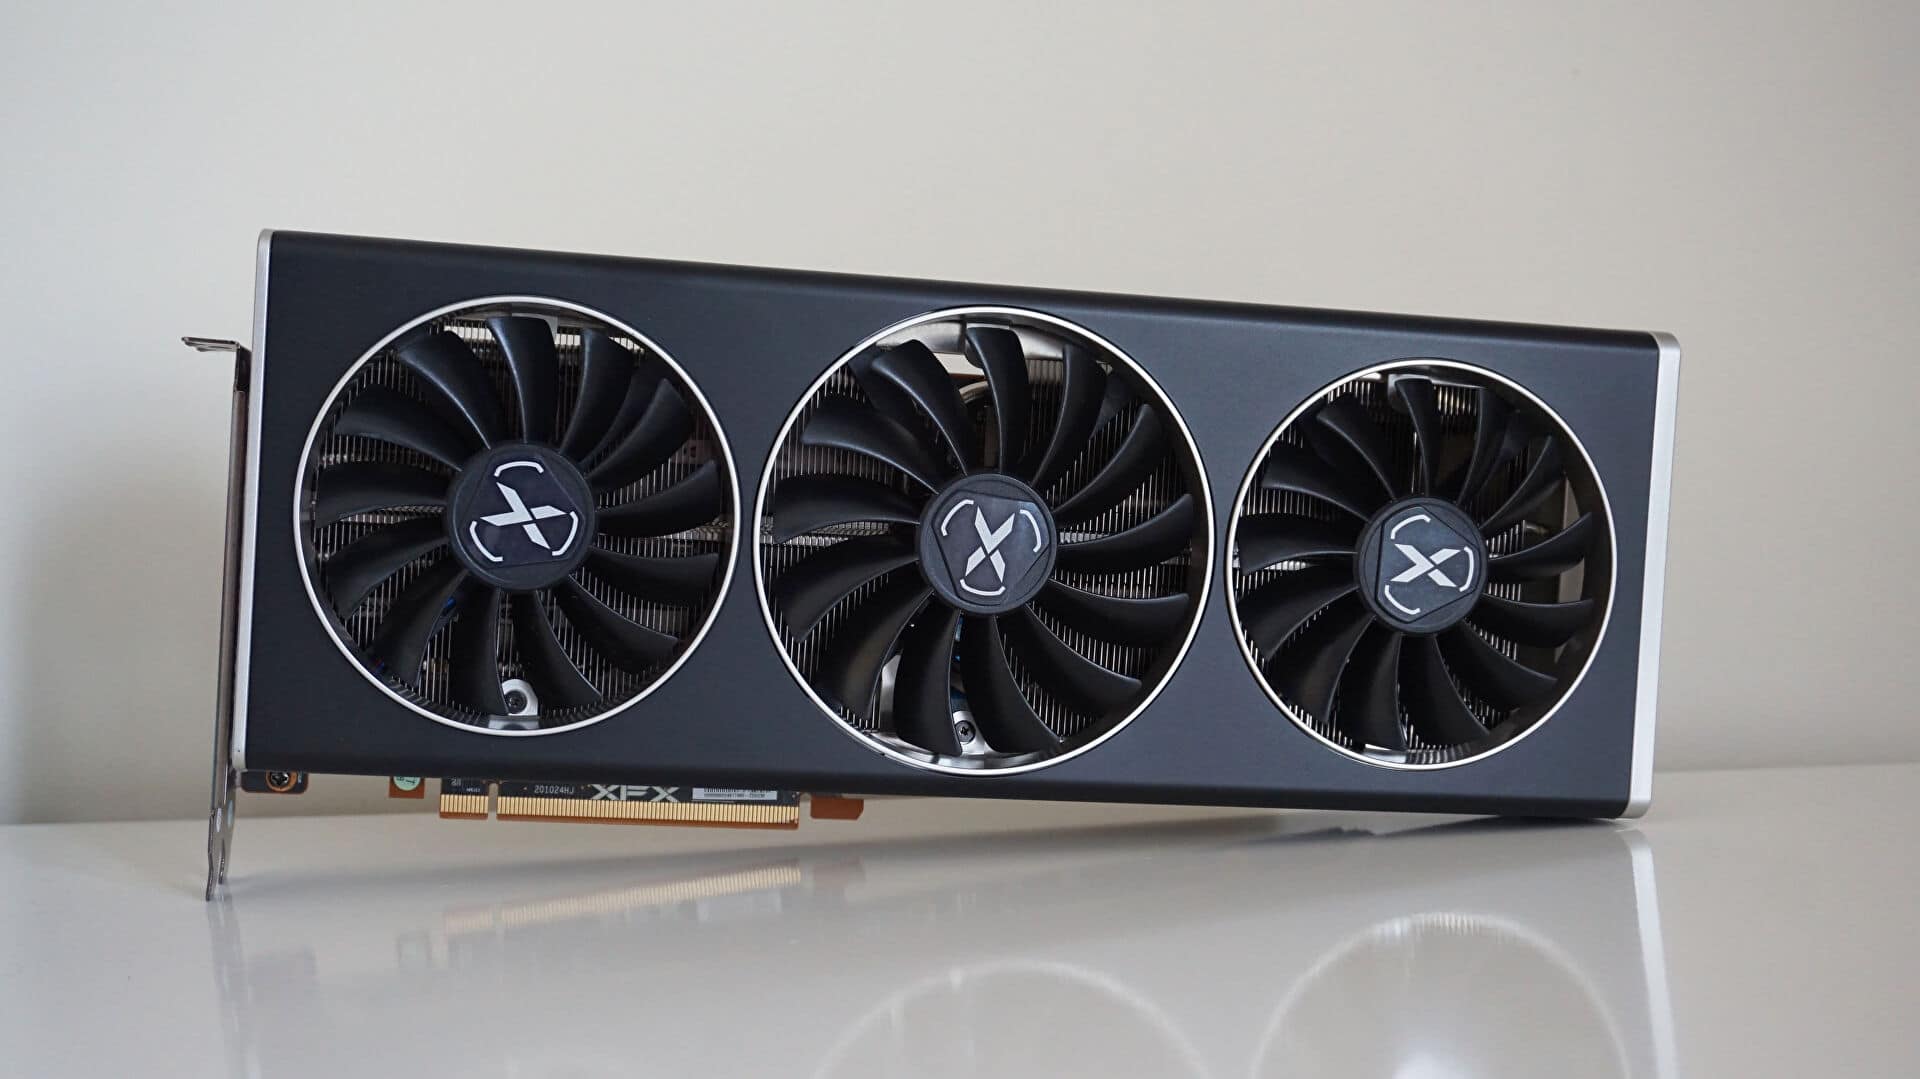 This RX 6700 XT graphics card costs just $480 after a $60 Amazon discount